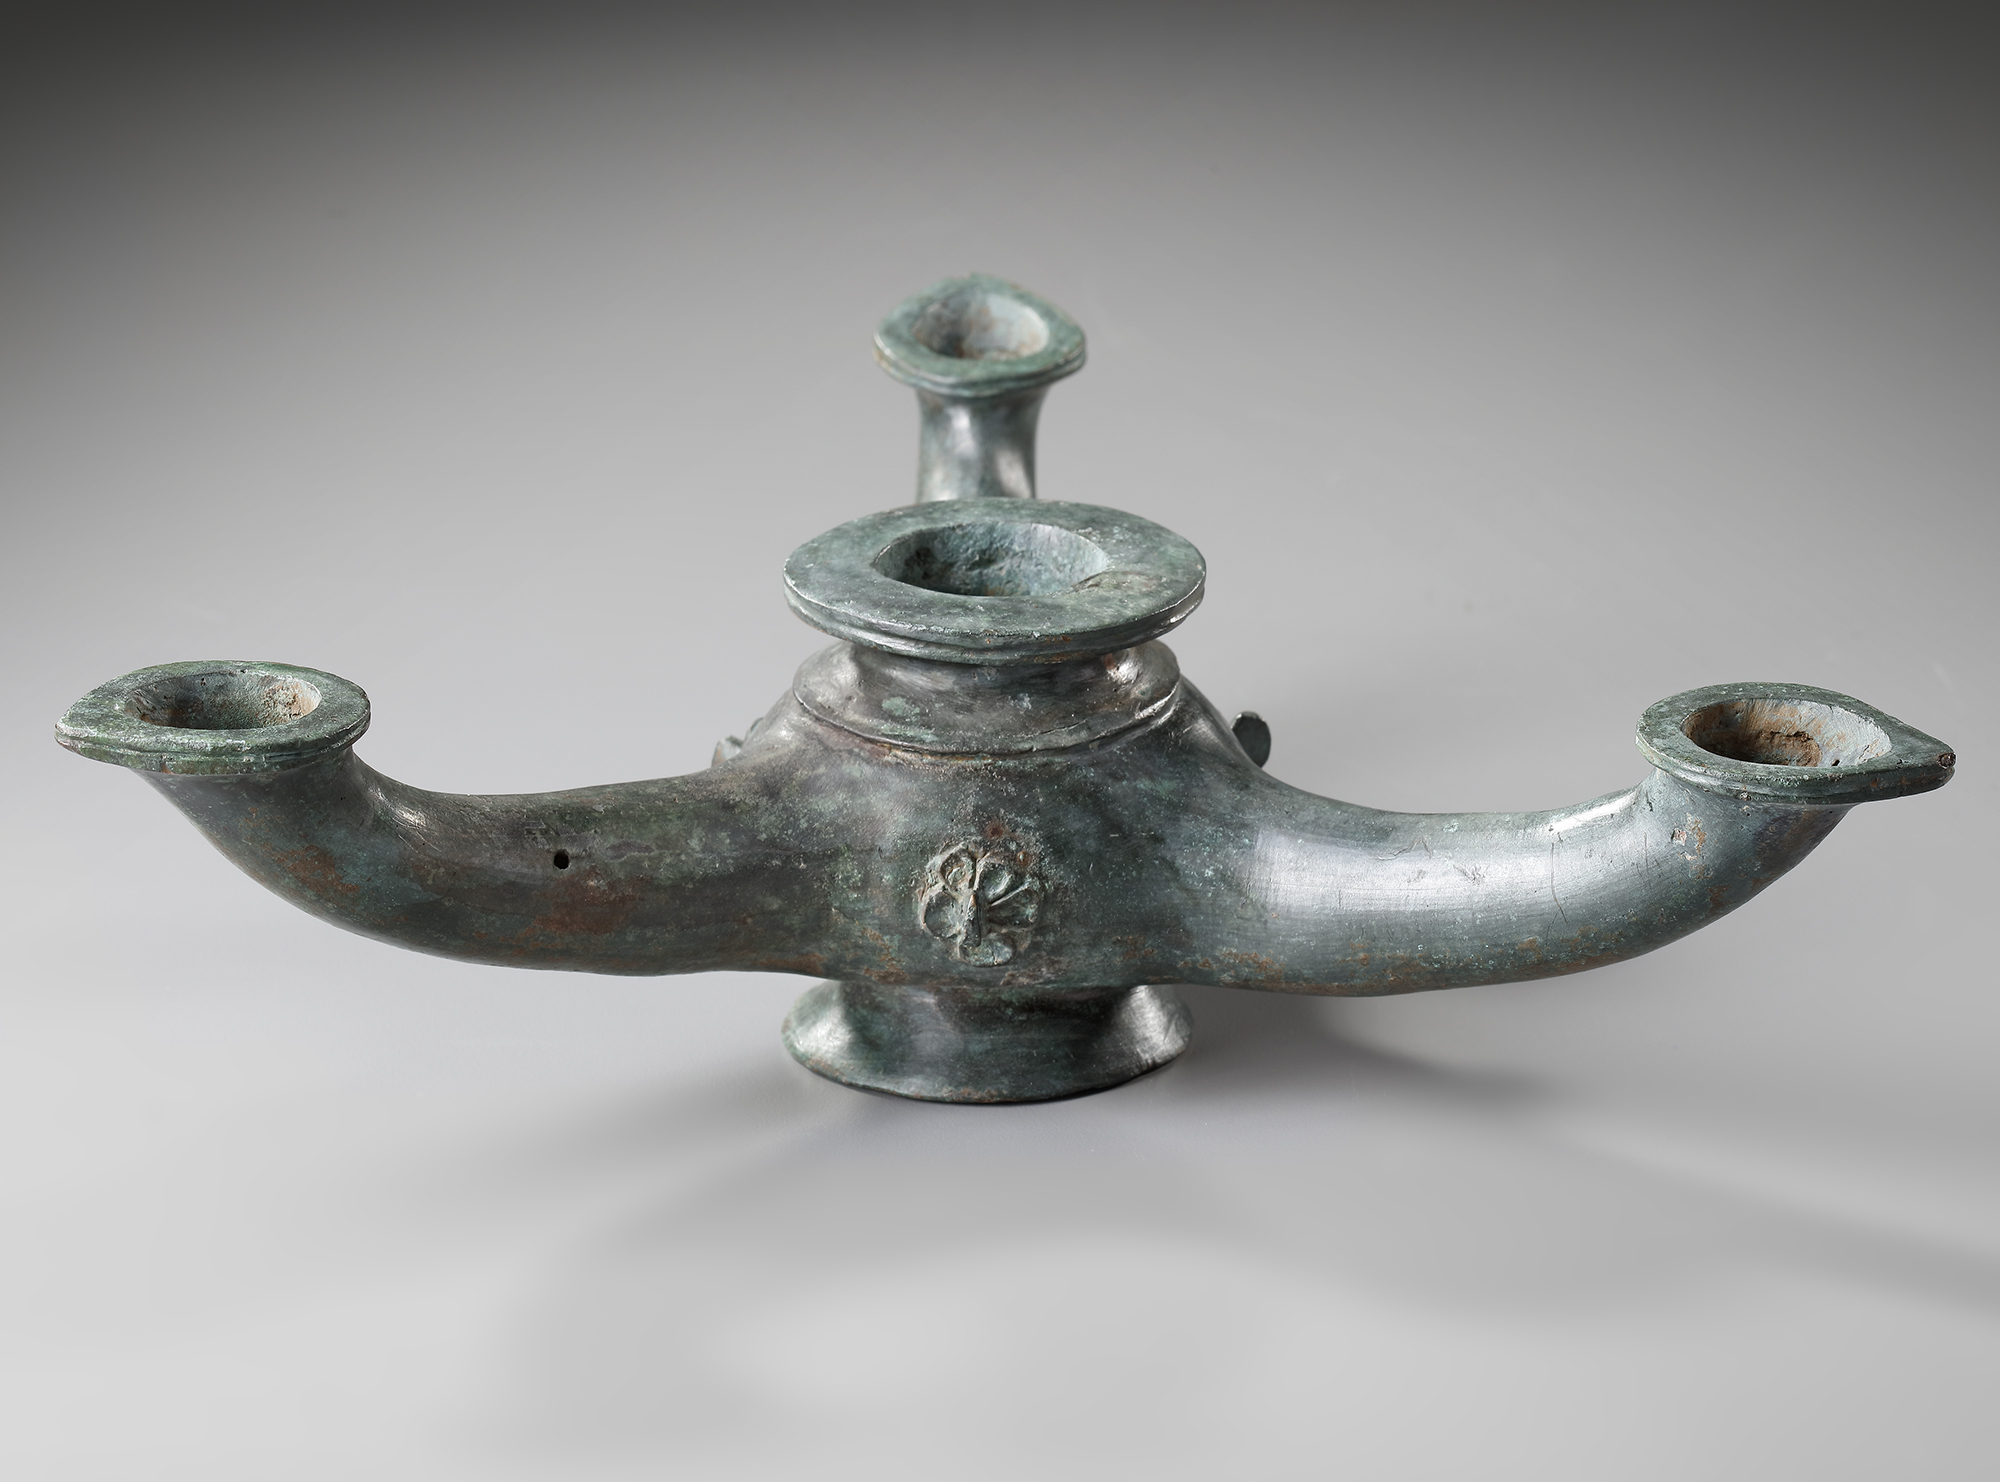 A BYZANTINE THREE -SPOUTED BRONZE OIL LAMP, CIRCA 4TH-5TH CENTURY A.D. - Image 2 of 4